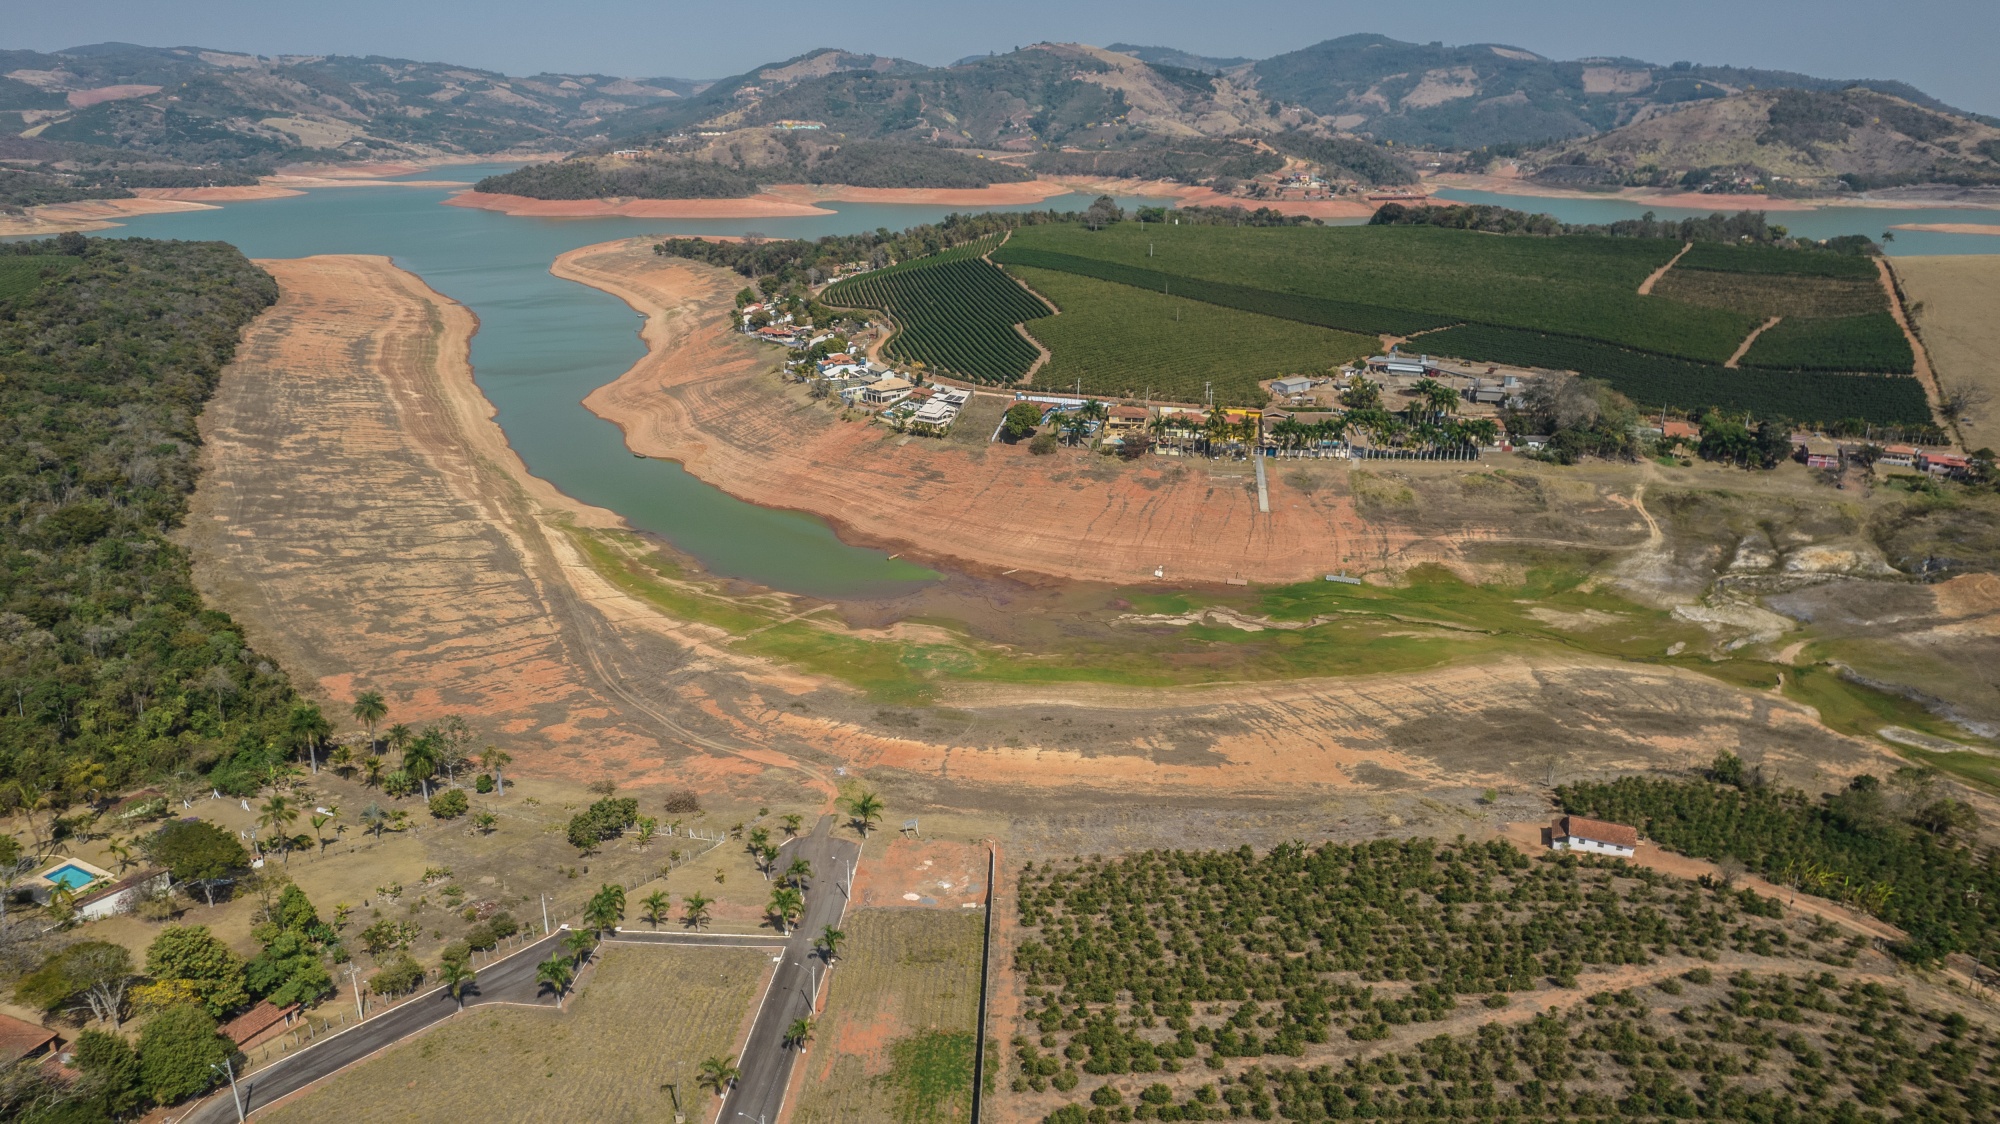 Dry land surrounds farmlands along the Pardo River during a drought in Caconde, Sao Paulo state, Brazil, on Aug. 24.